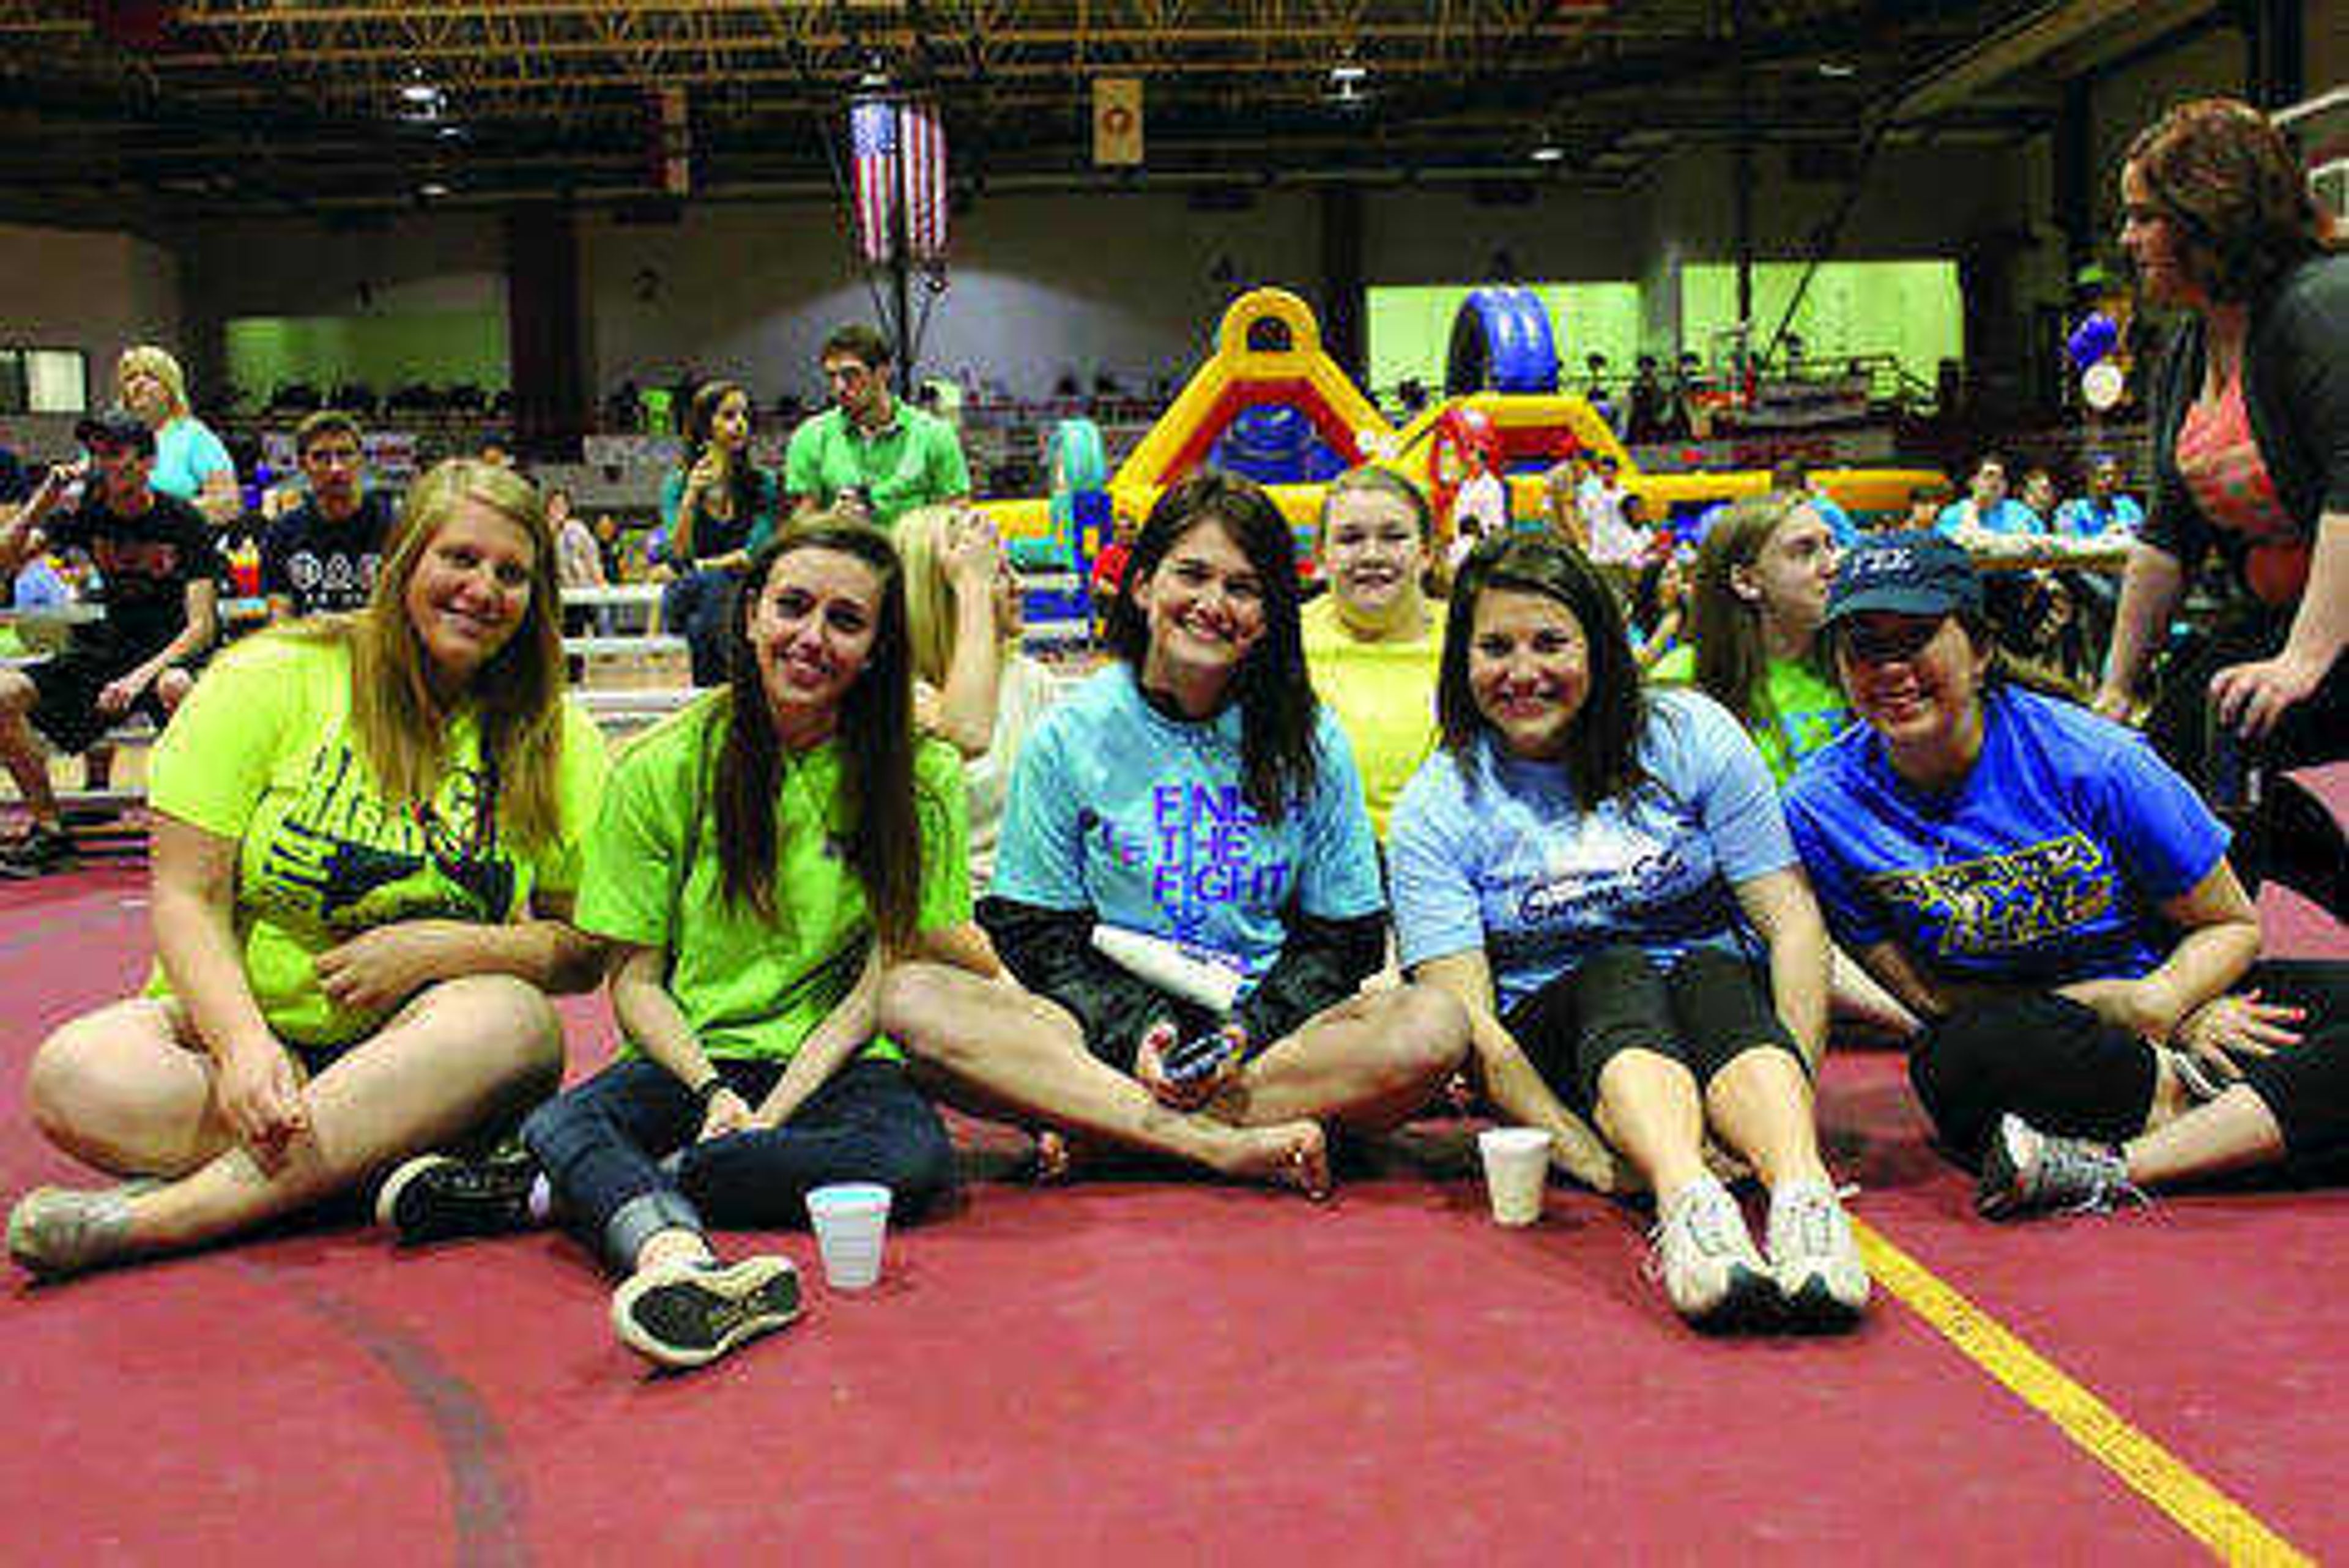 Southeast students at Relay For Life. Submitted photo